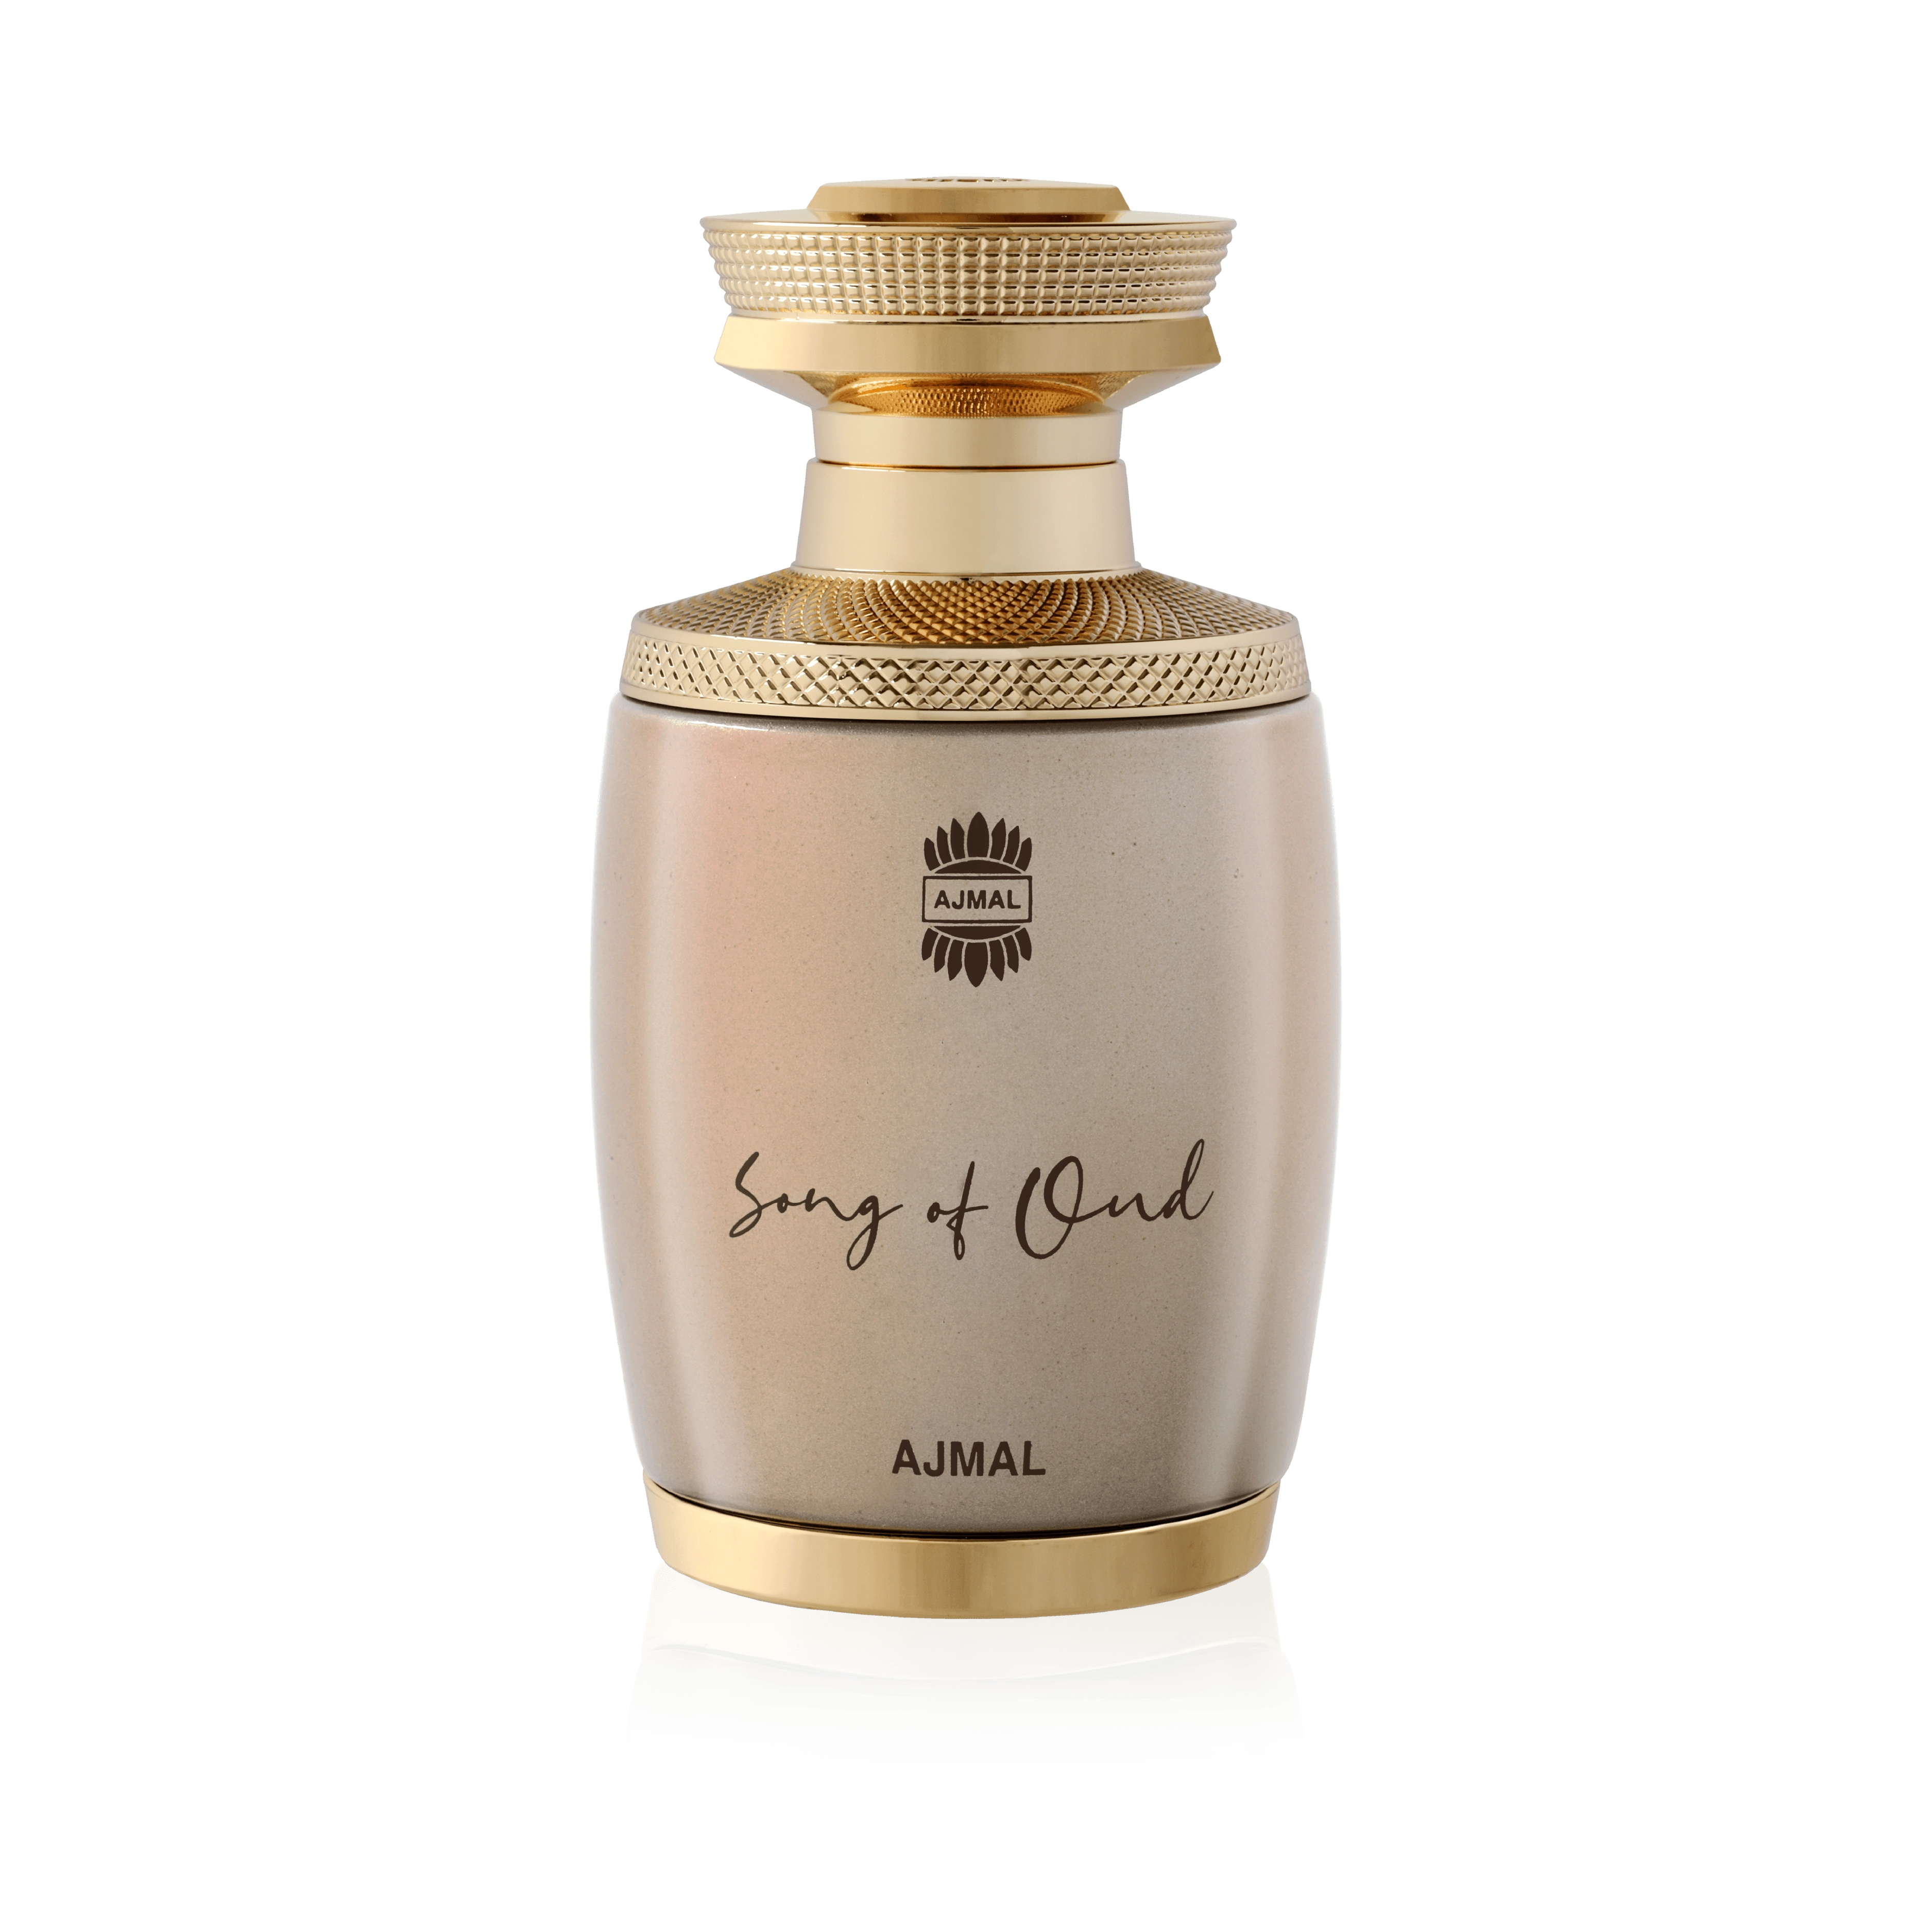 Song Of Oudh